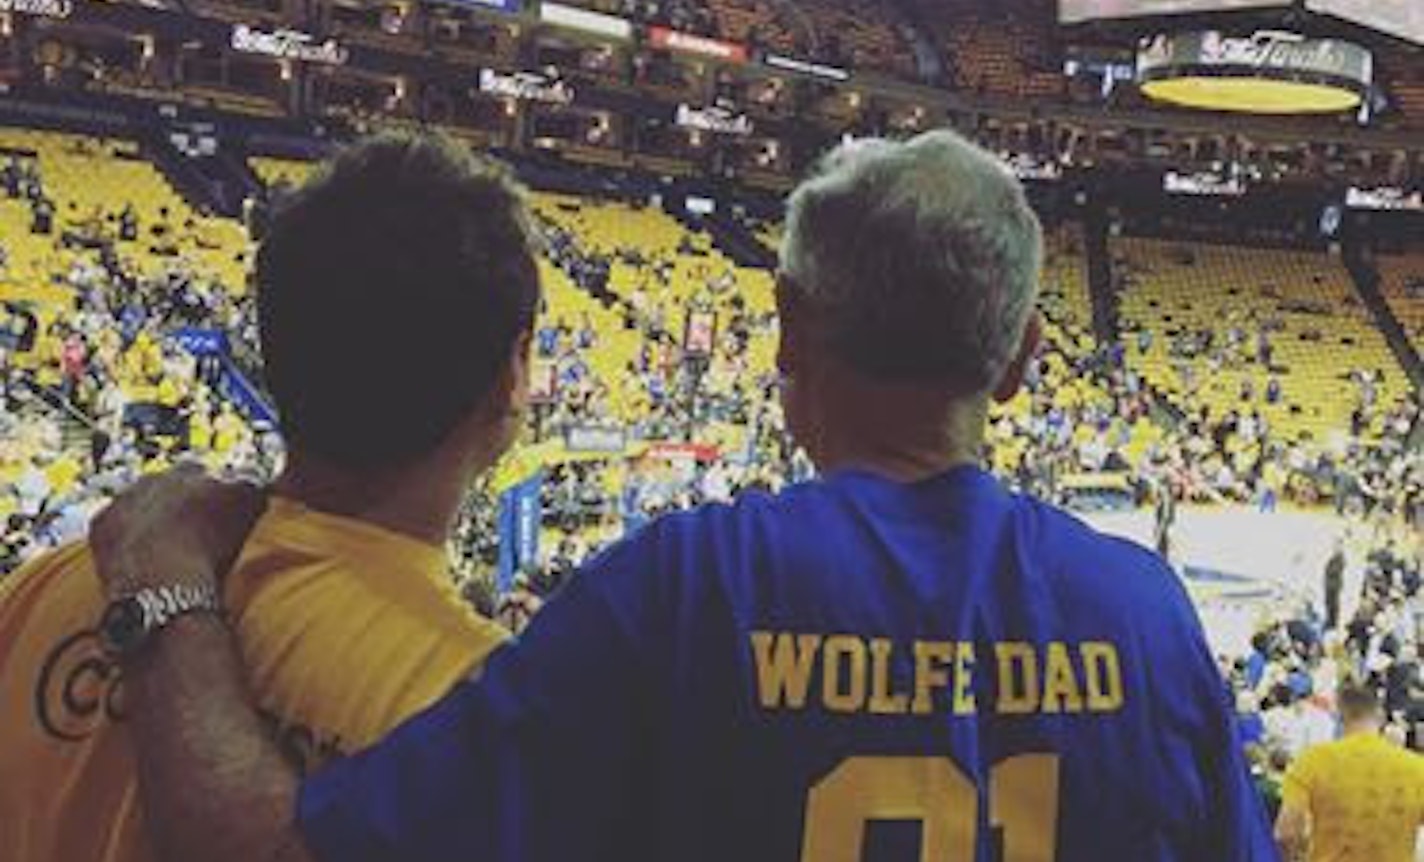 Dose of Togetherness: Brad Wolfe in Conversation w/ His Dad